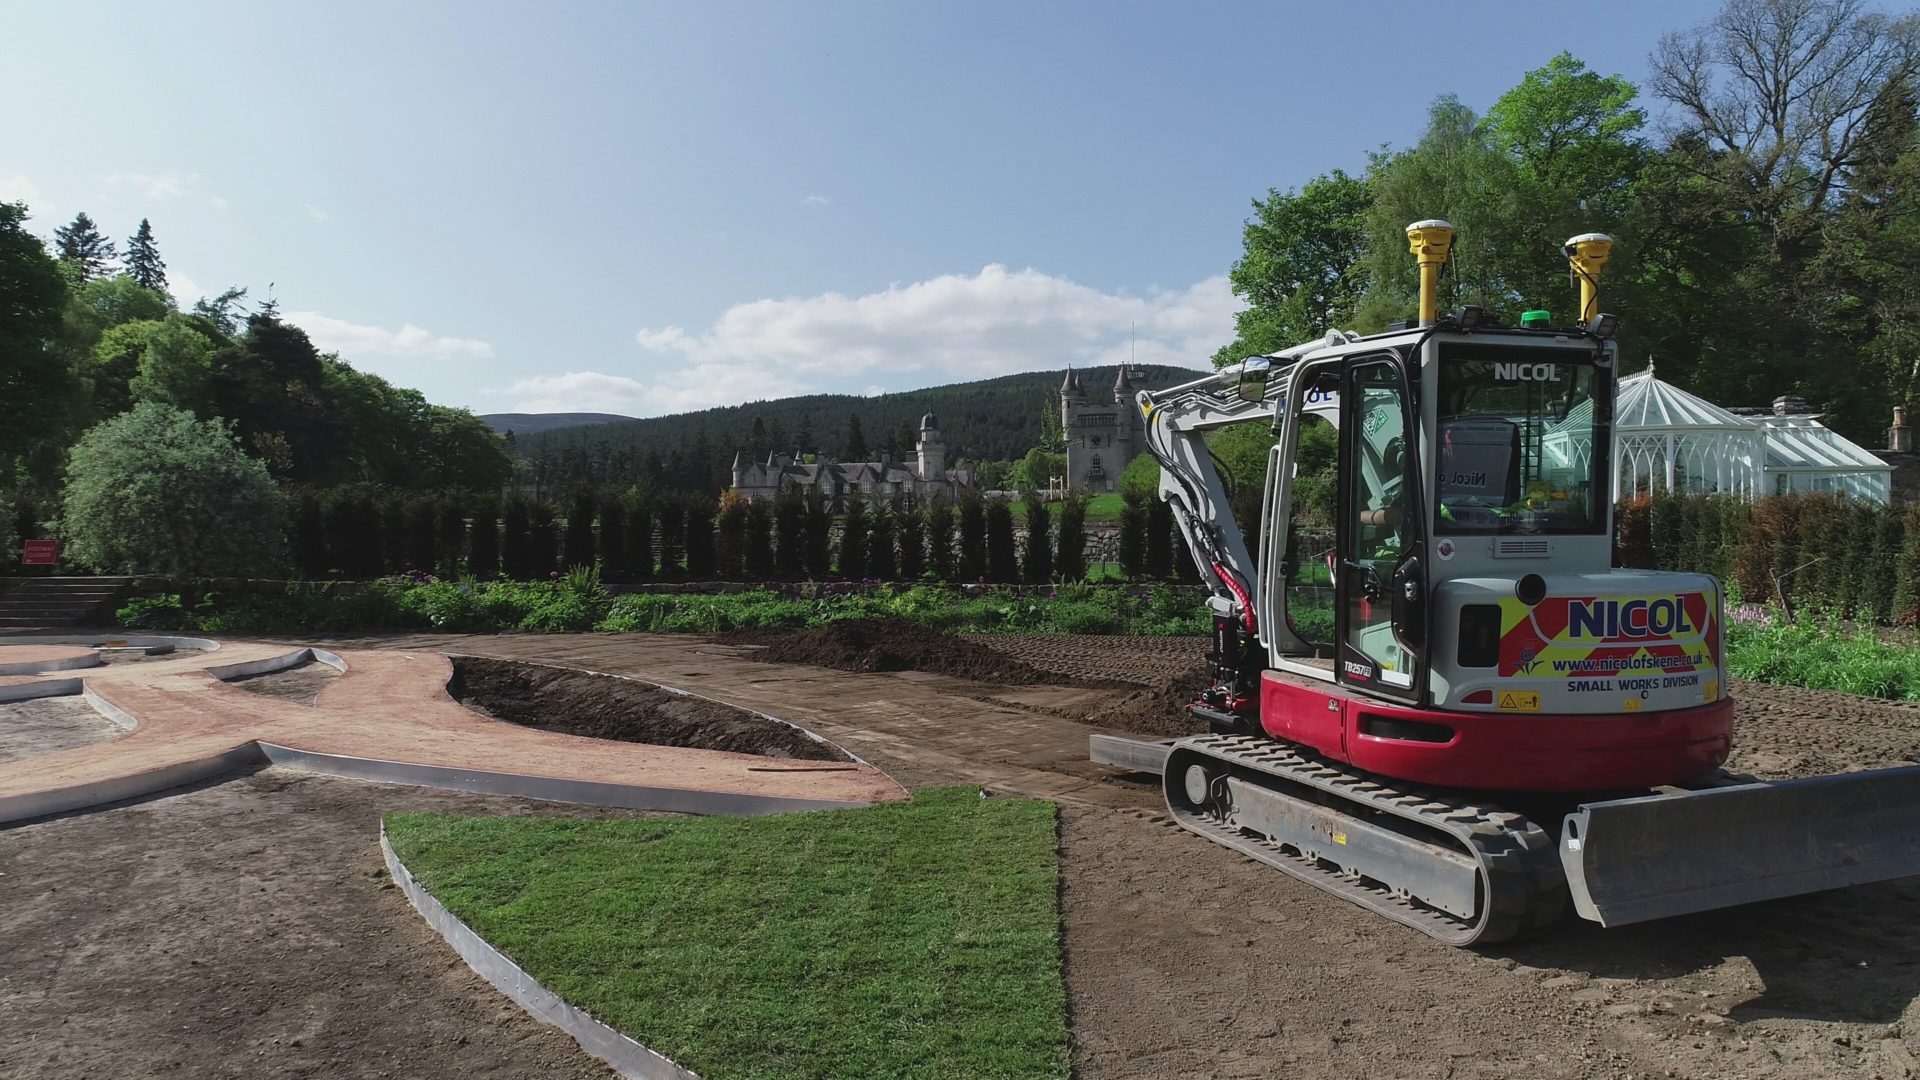 An excavator in a garden with a castle in the background.